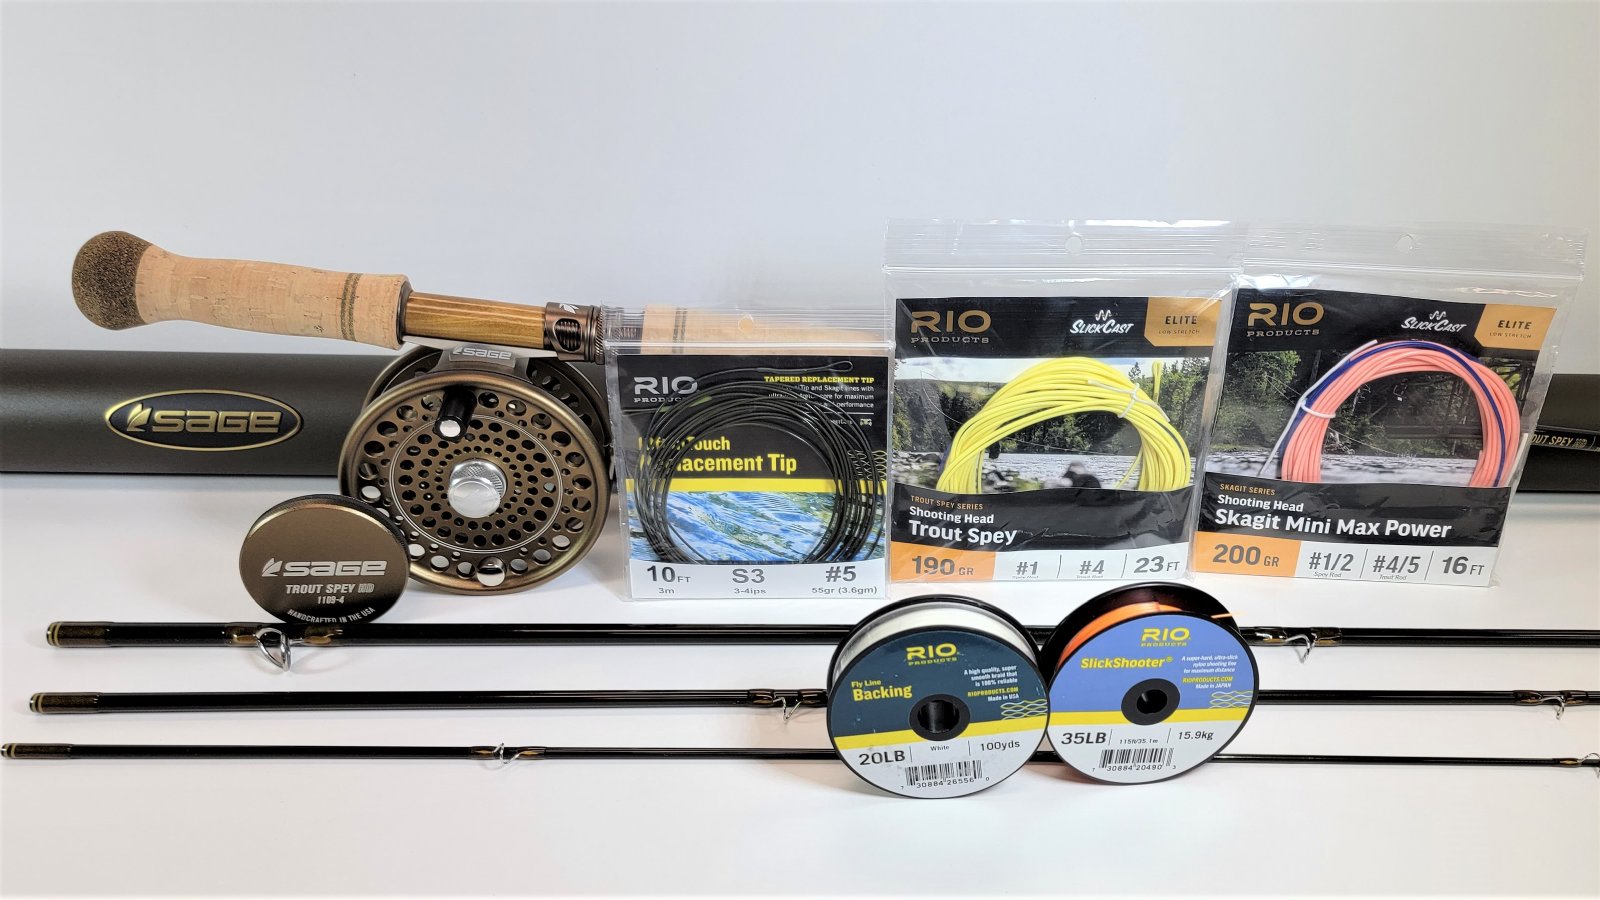 Sage TROUT Fly Reels